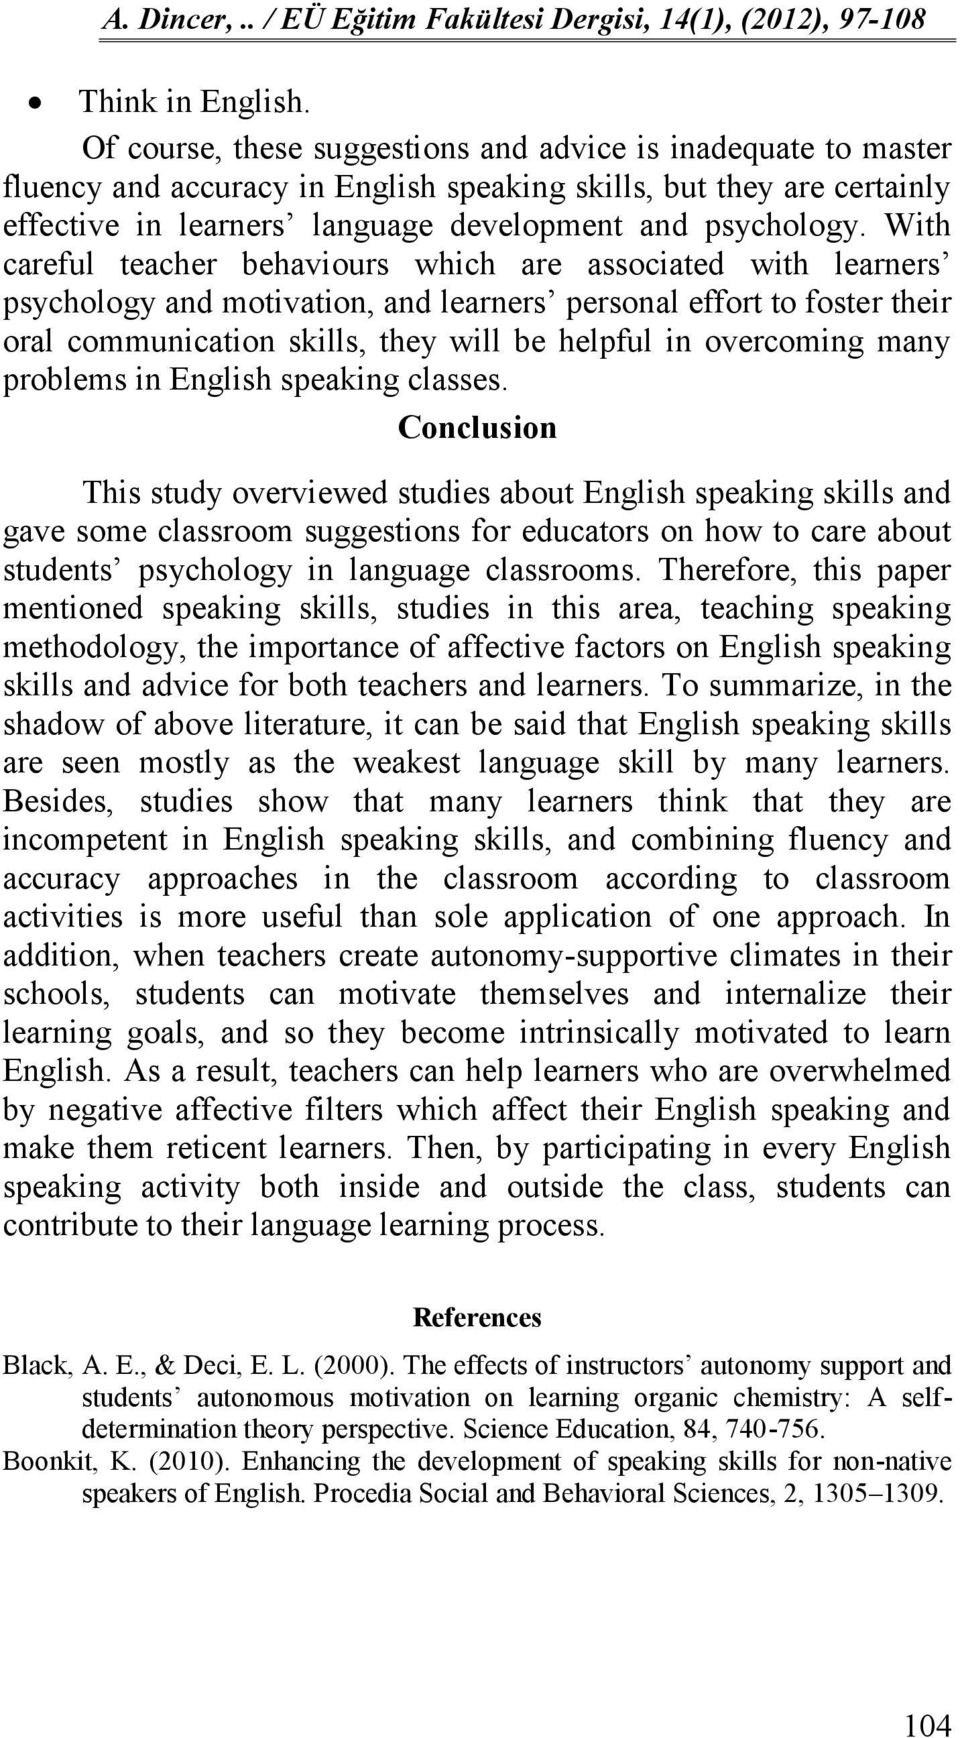 With careful teacher behaviours which are associated with learners psychology and motivation, and learners personal effort to foster their oral communication skills, they will be helpful in